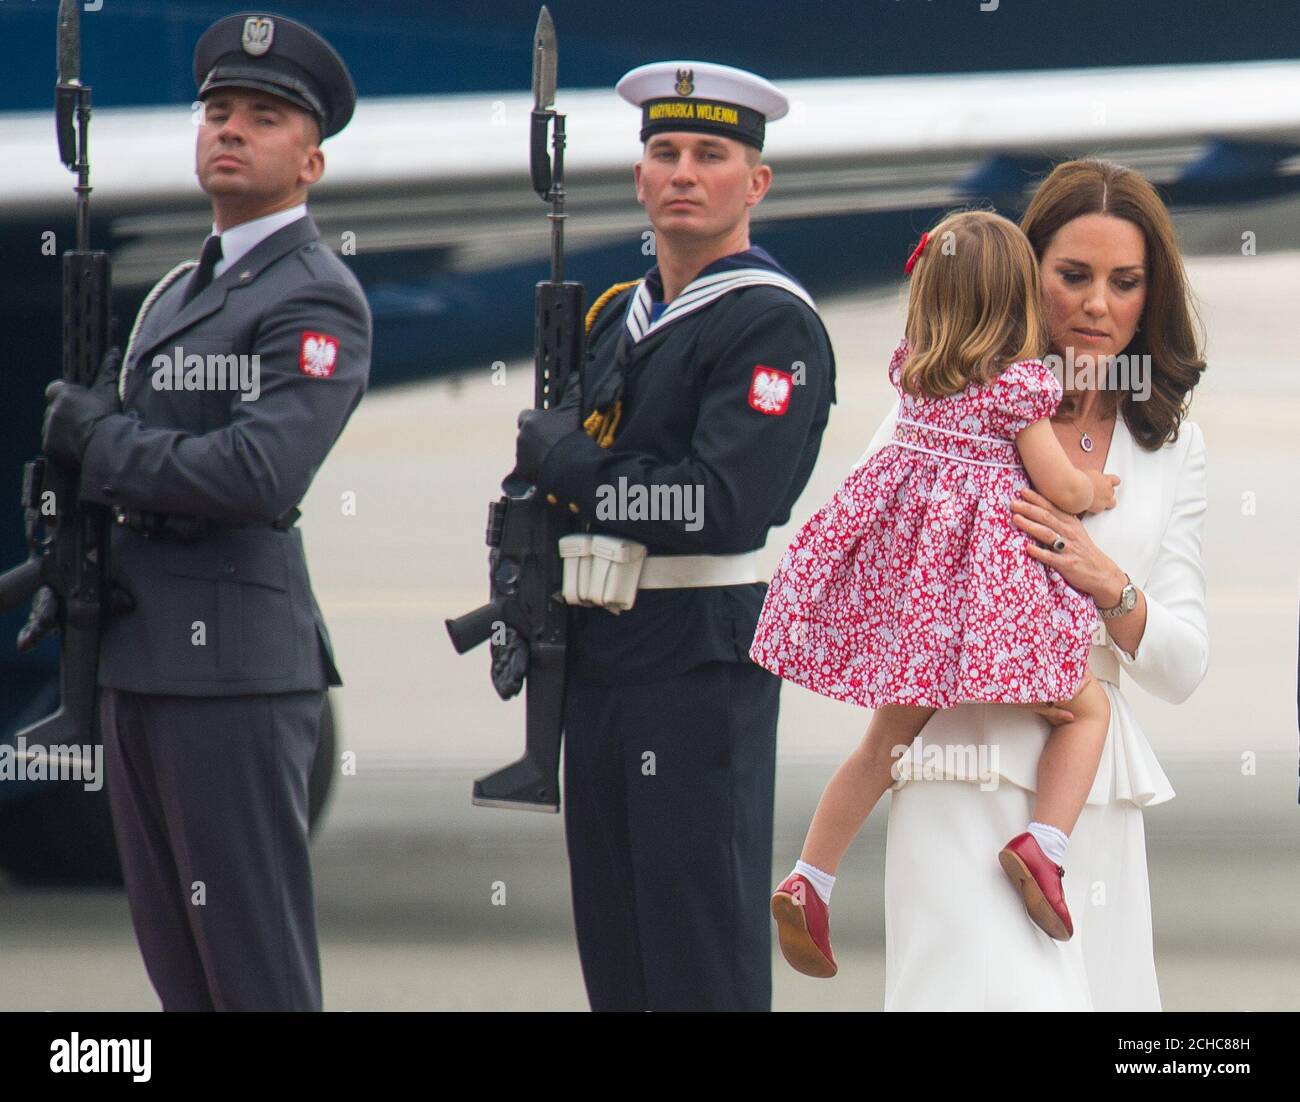 The Duchess of Cambridge and Princess Charlotte arrive at Warsaw Chopin airport, on day one of their five-day tour of Poland and Germany. PRESS ASSOCIATION Photo. Picture date: Monday July 17, 2017. See PA story ROYAL Cambridge. Photo credit should read: Dominic Lipinski/PA Wire Stock Photo